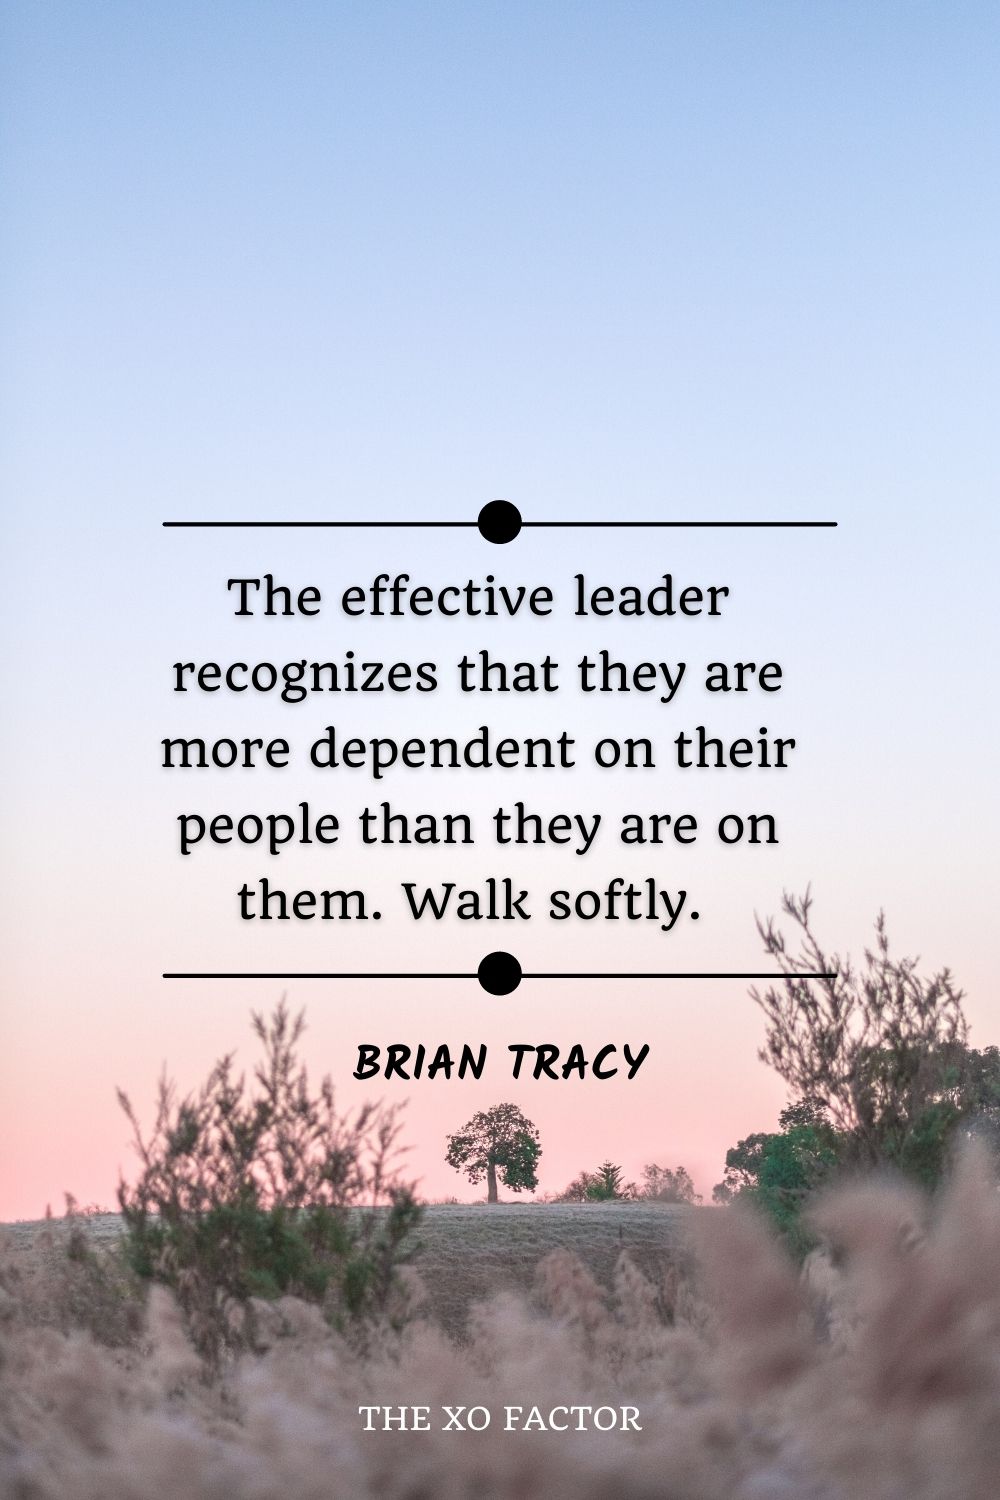 The effective leader recognizes that they are more dependent on their people than they are on them. Walk softly. ” – Brian Tracy